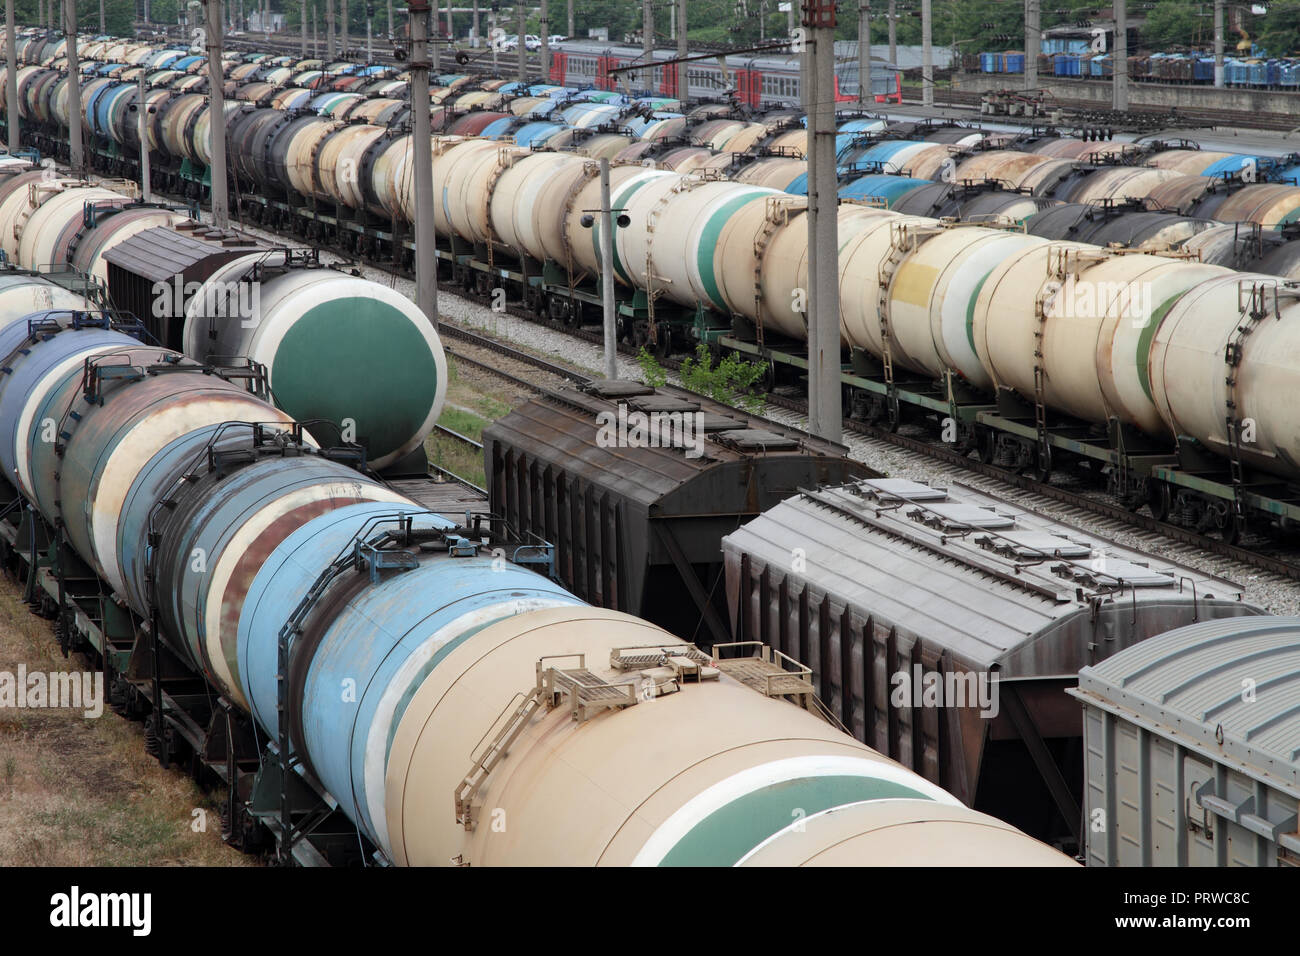 Tanks for the transportation of oil are on the railroad tracks. Stock Photo